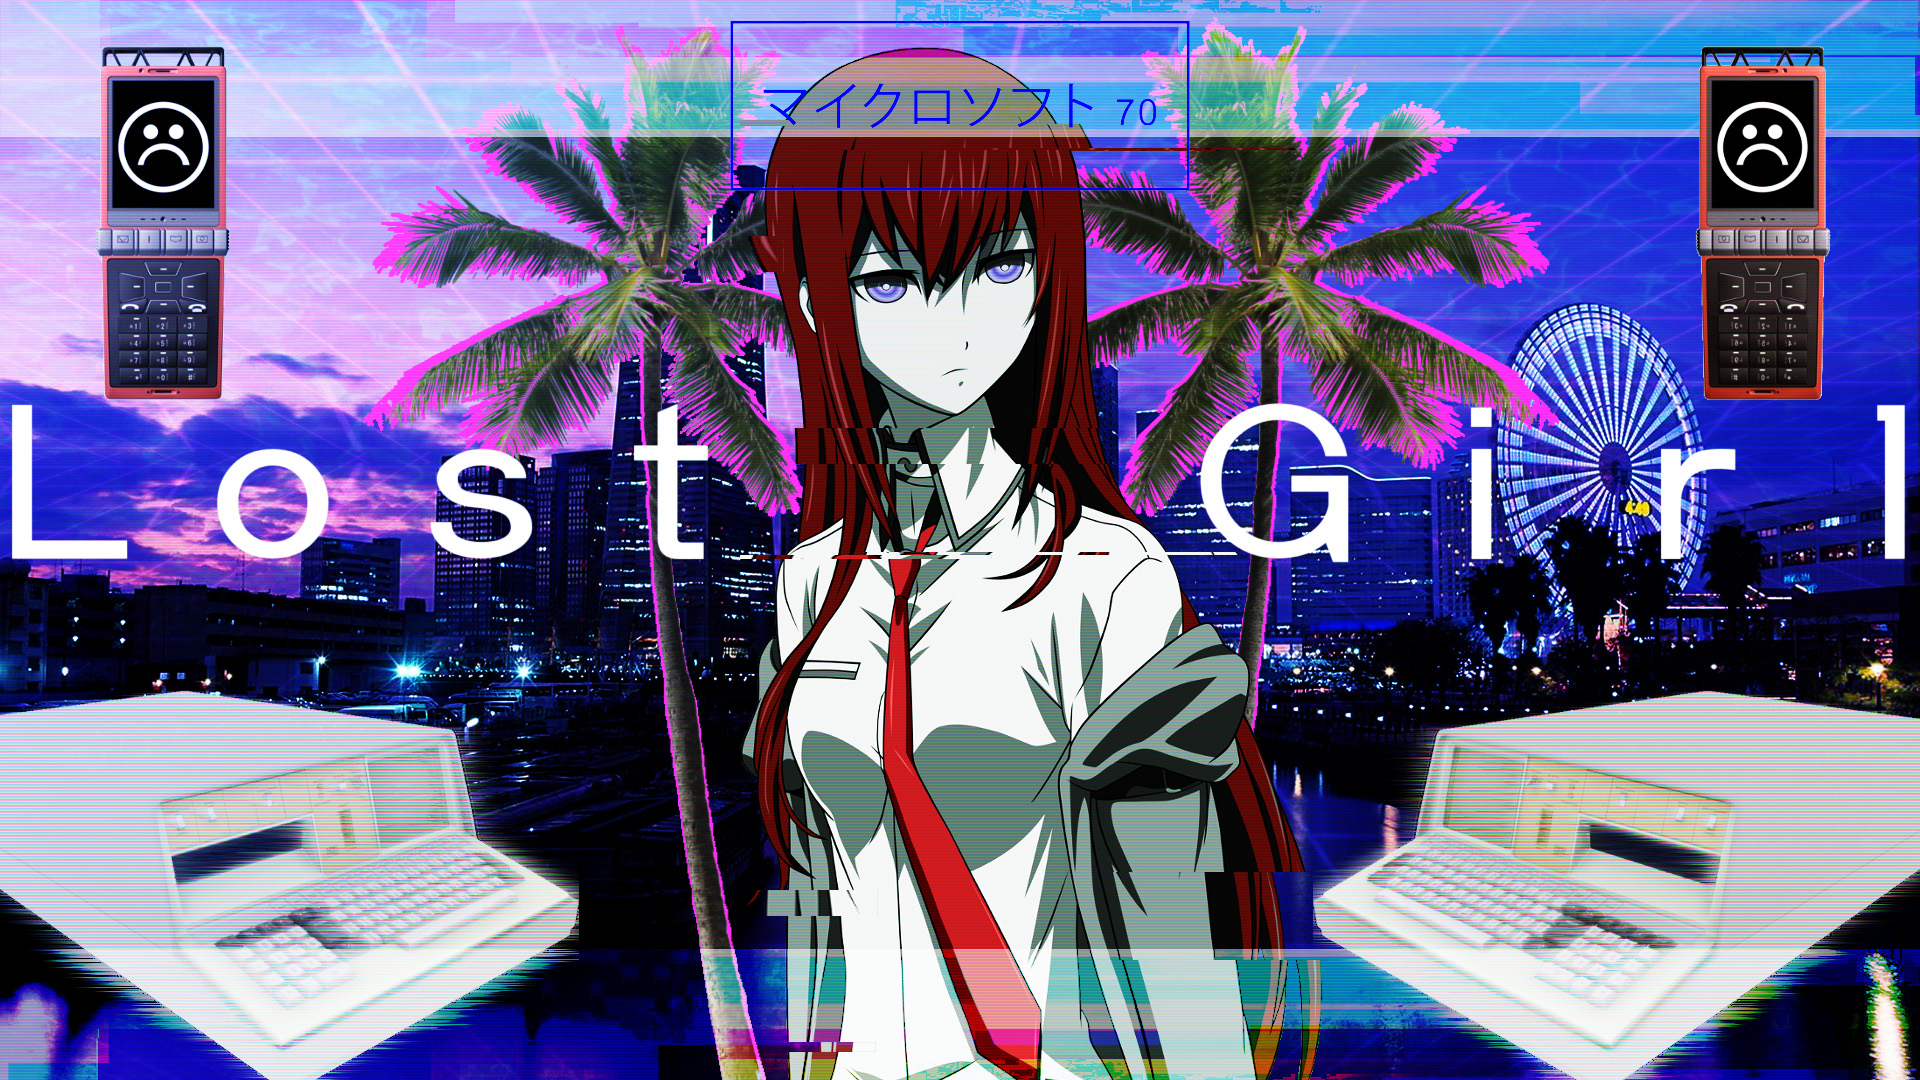 My Anime Vaporwave Wallpaper #08 by iamthebest052 on ...